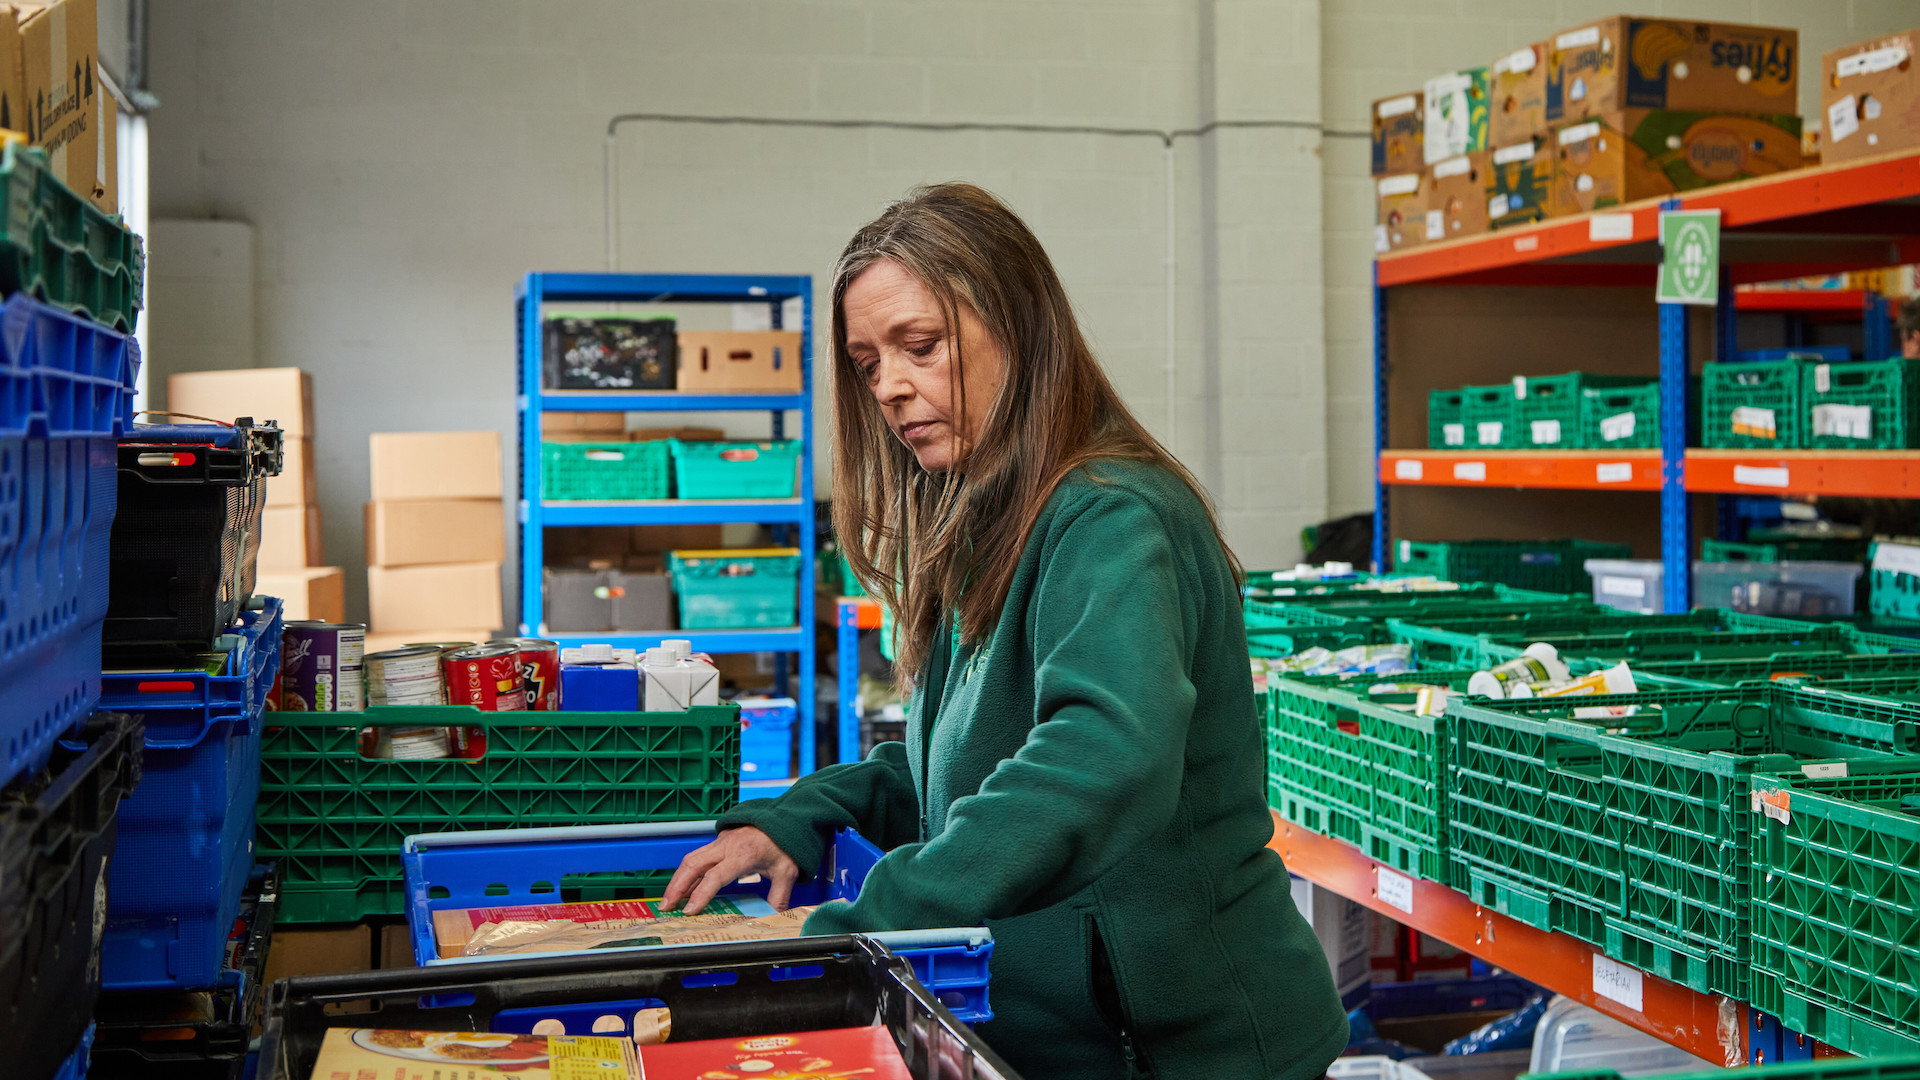 trussell trust food banks